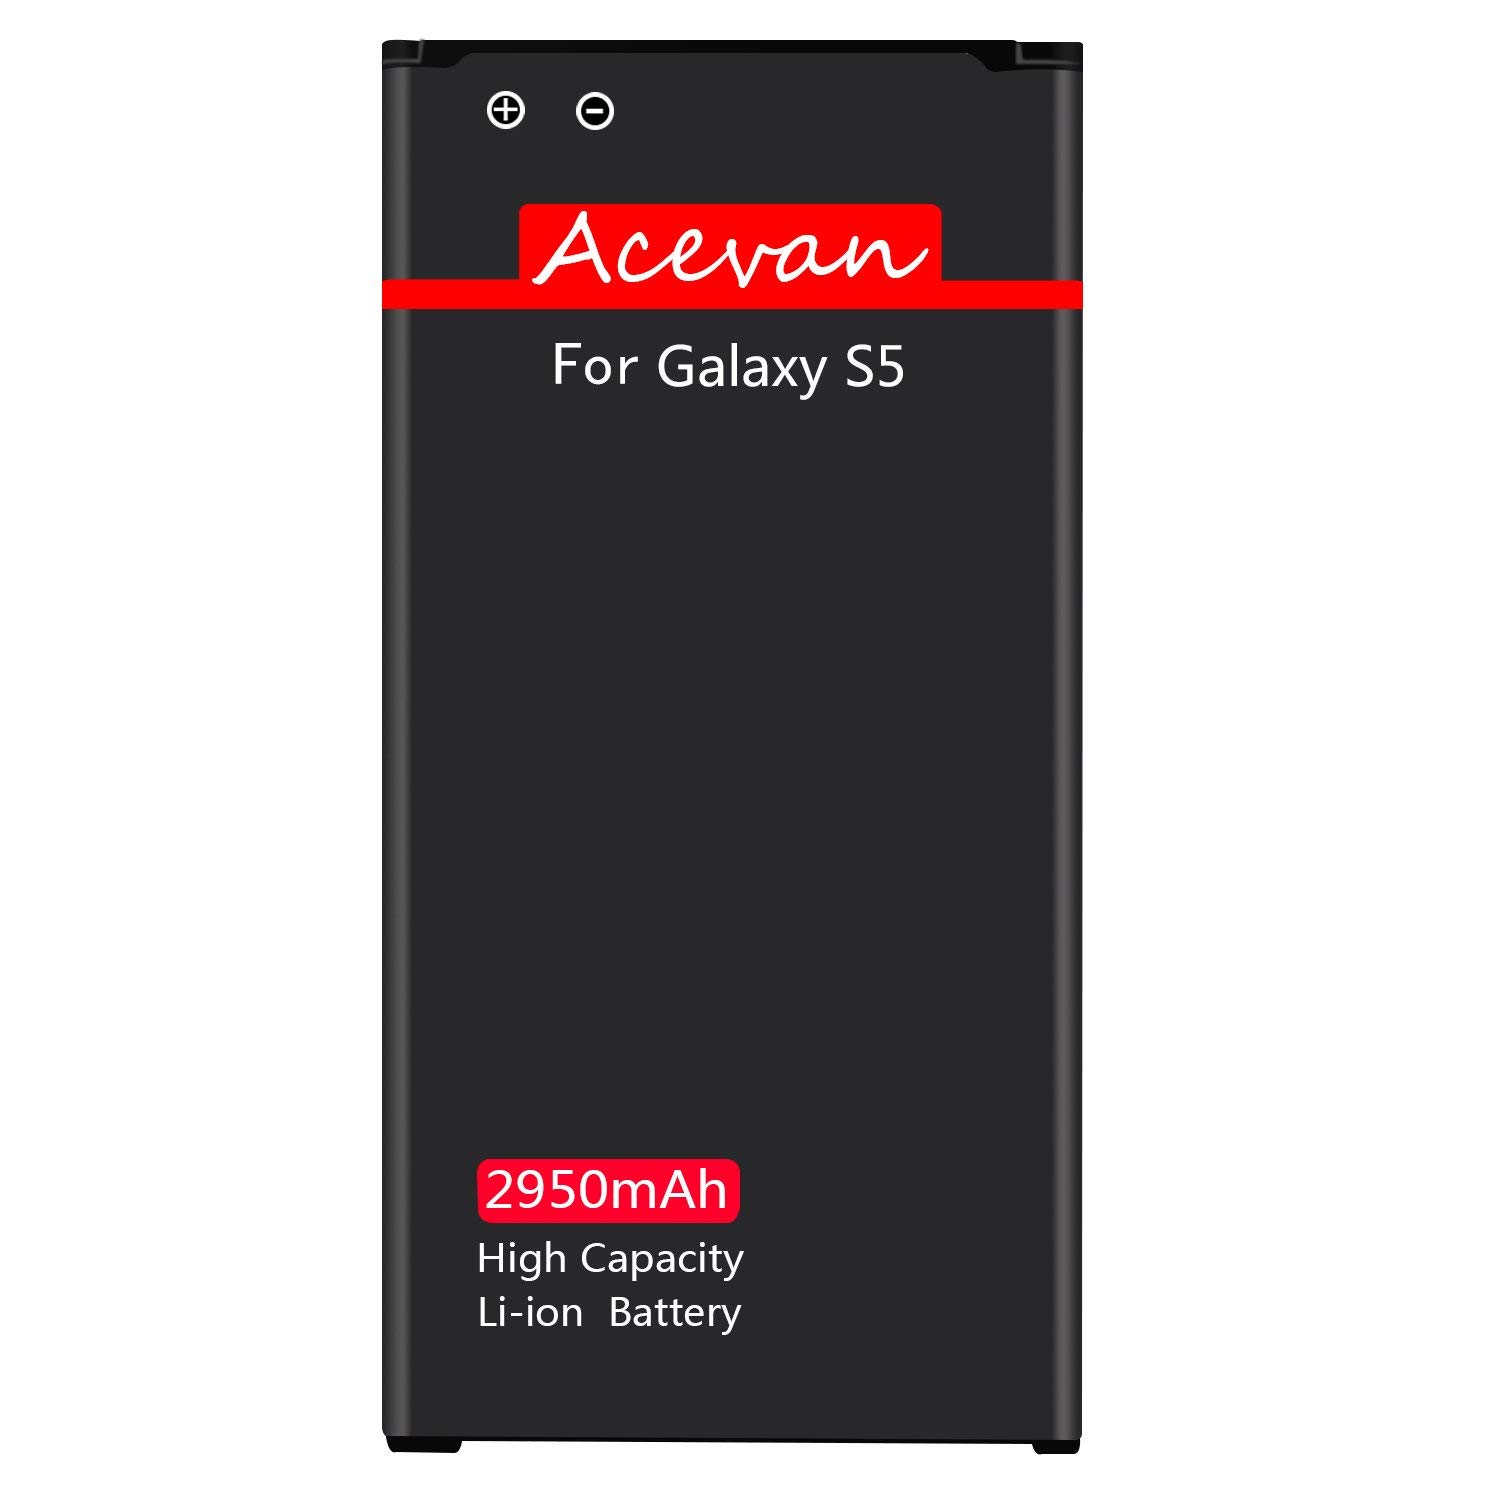 Galaxy S5 Battery Acevan 2950mAh Li-ion Replacement Battery for Samsung